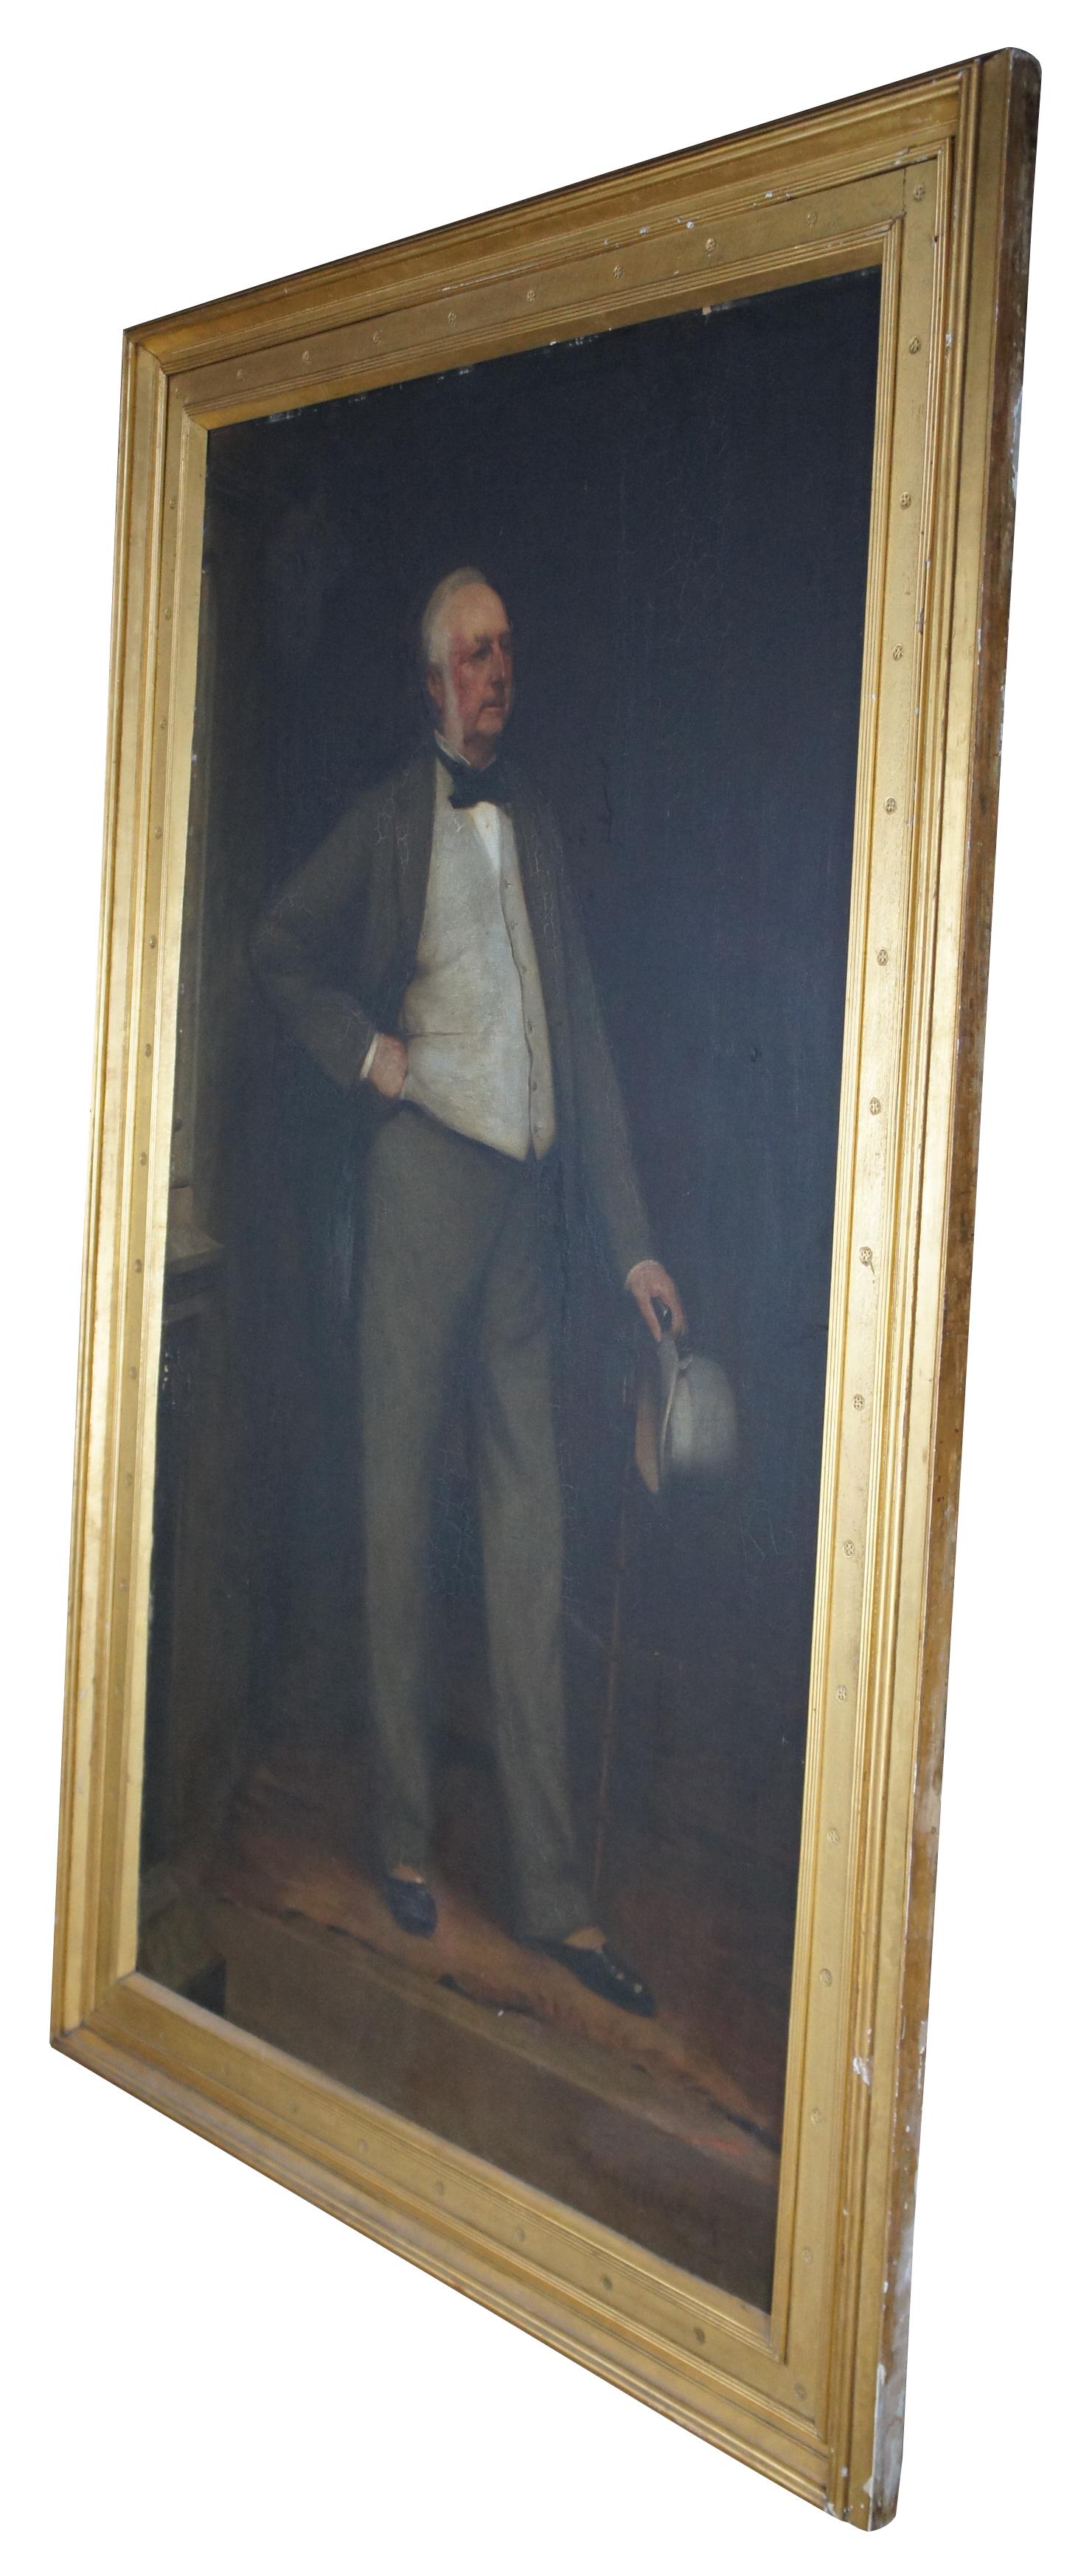 Monumental antique 1890 oil painting on canvas of Robert Heath (1816-1893) by Hugh de Twenebrokes Glazebrook (1855-1937). Painted a few years before Heath's death featuring a full length portrait of him dressed in formal attire with hat, cane and